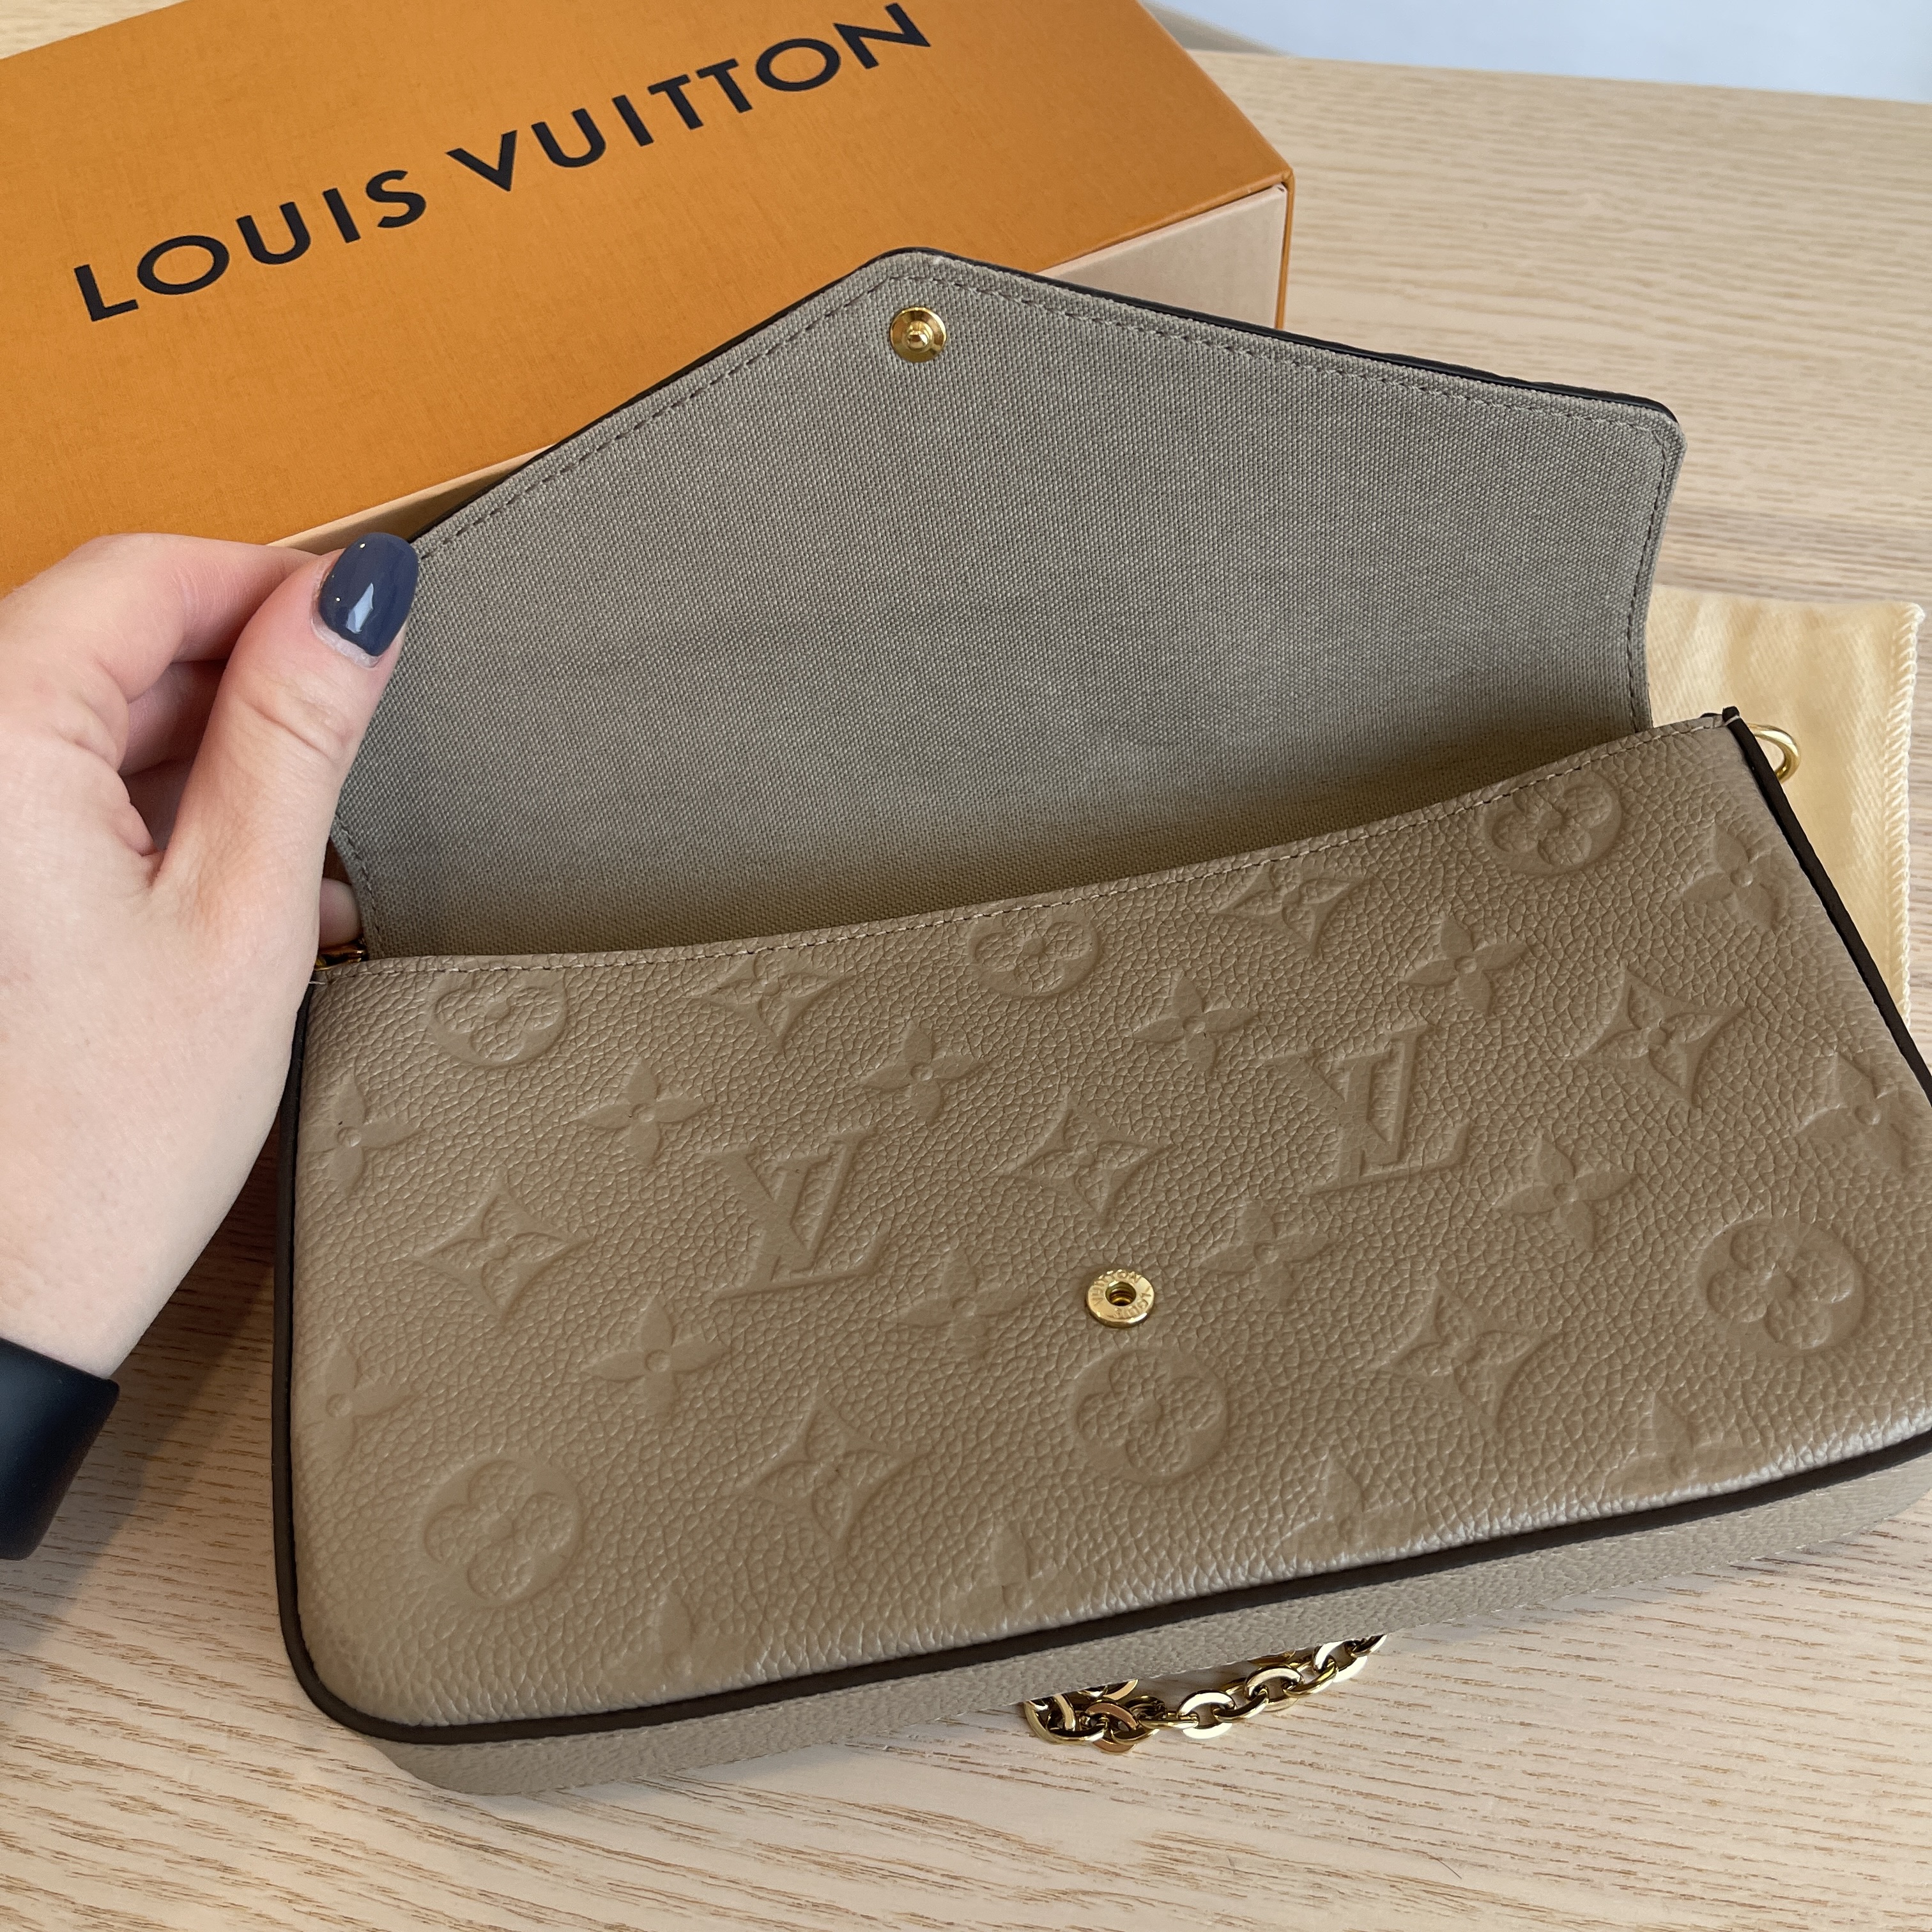 Louis Vuitton Felicie, Turtledove with Inserts, New in Dustbag